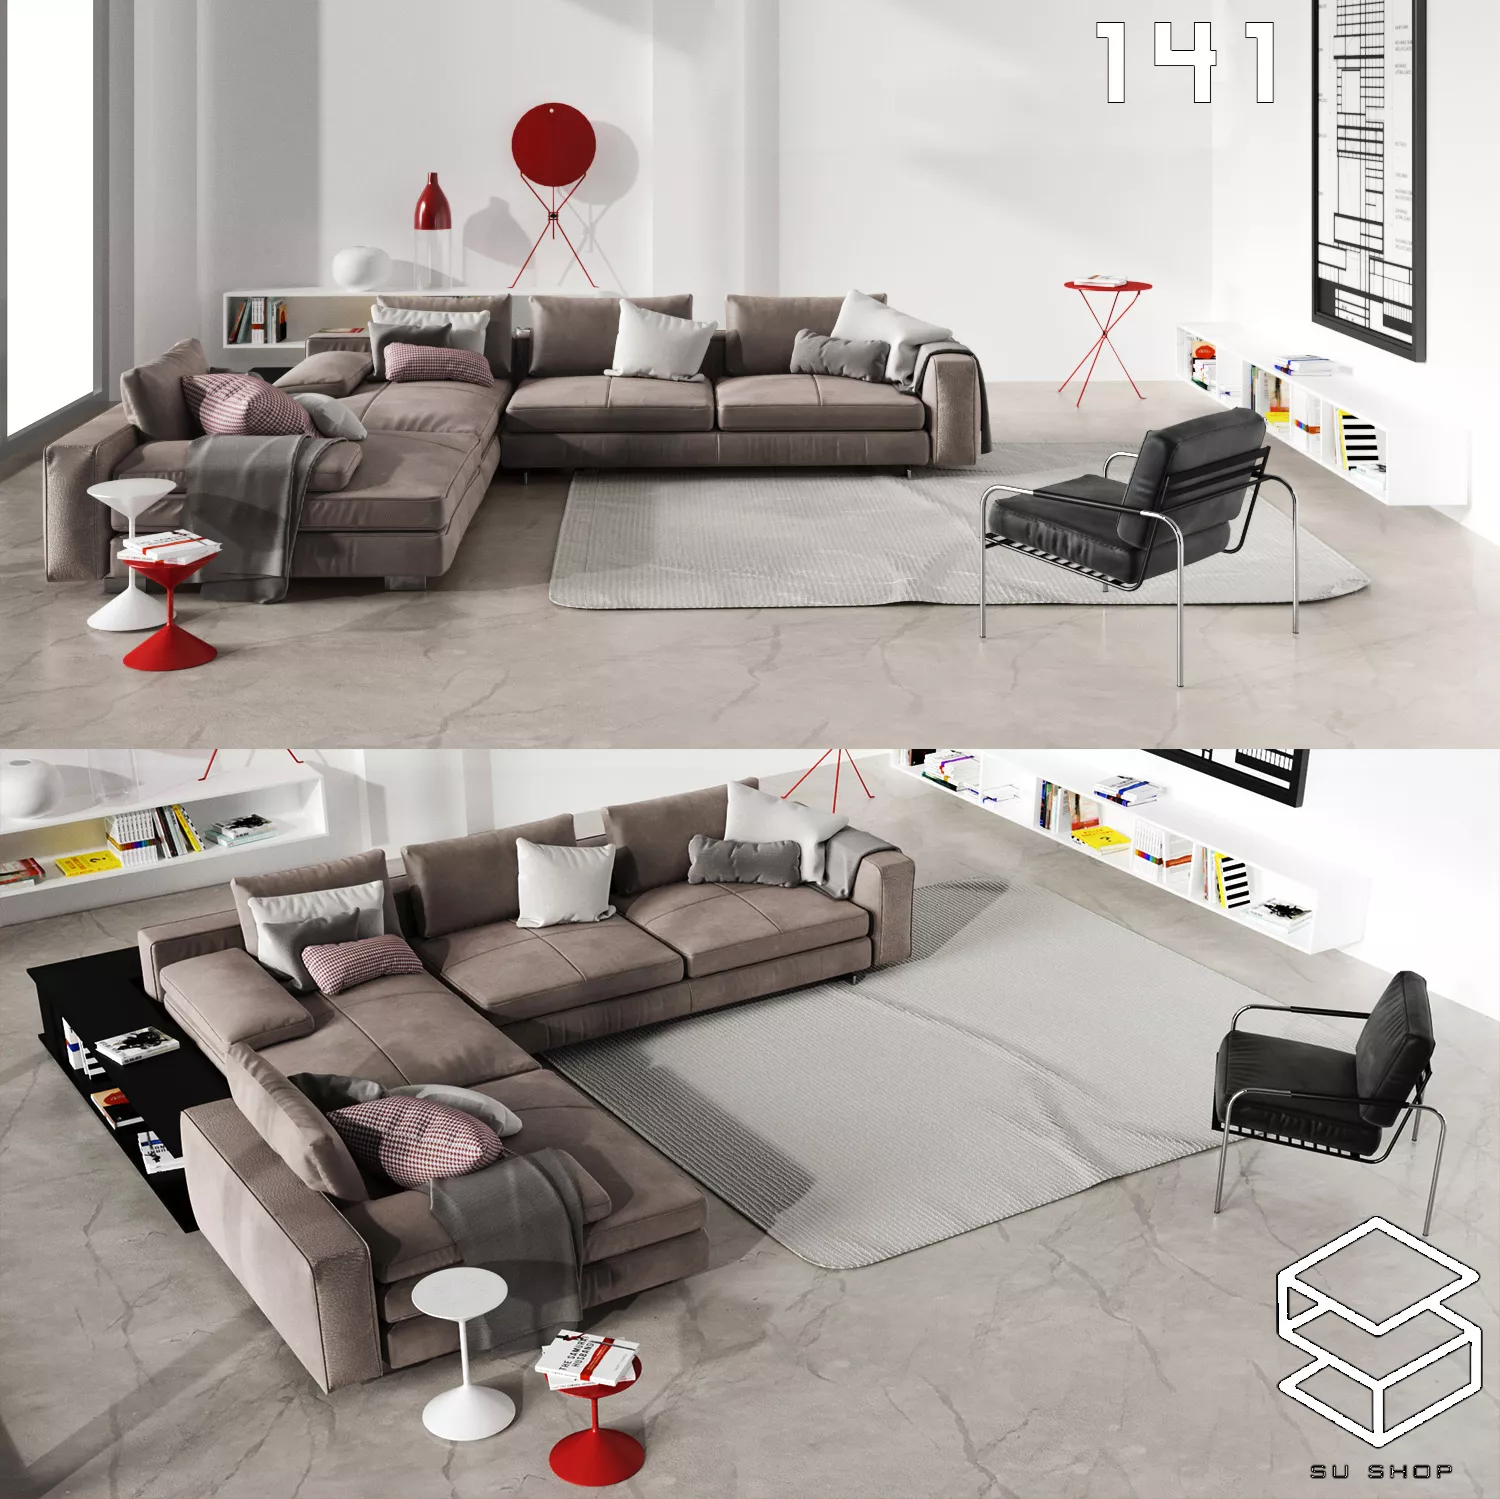 MODERN SOFA - SKETCHUP 3D MODEL - VRAY OR ENSCAPE - ID13432